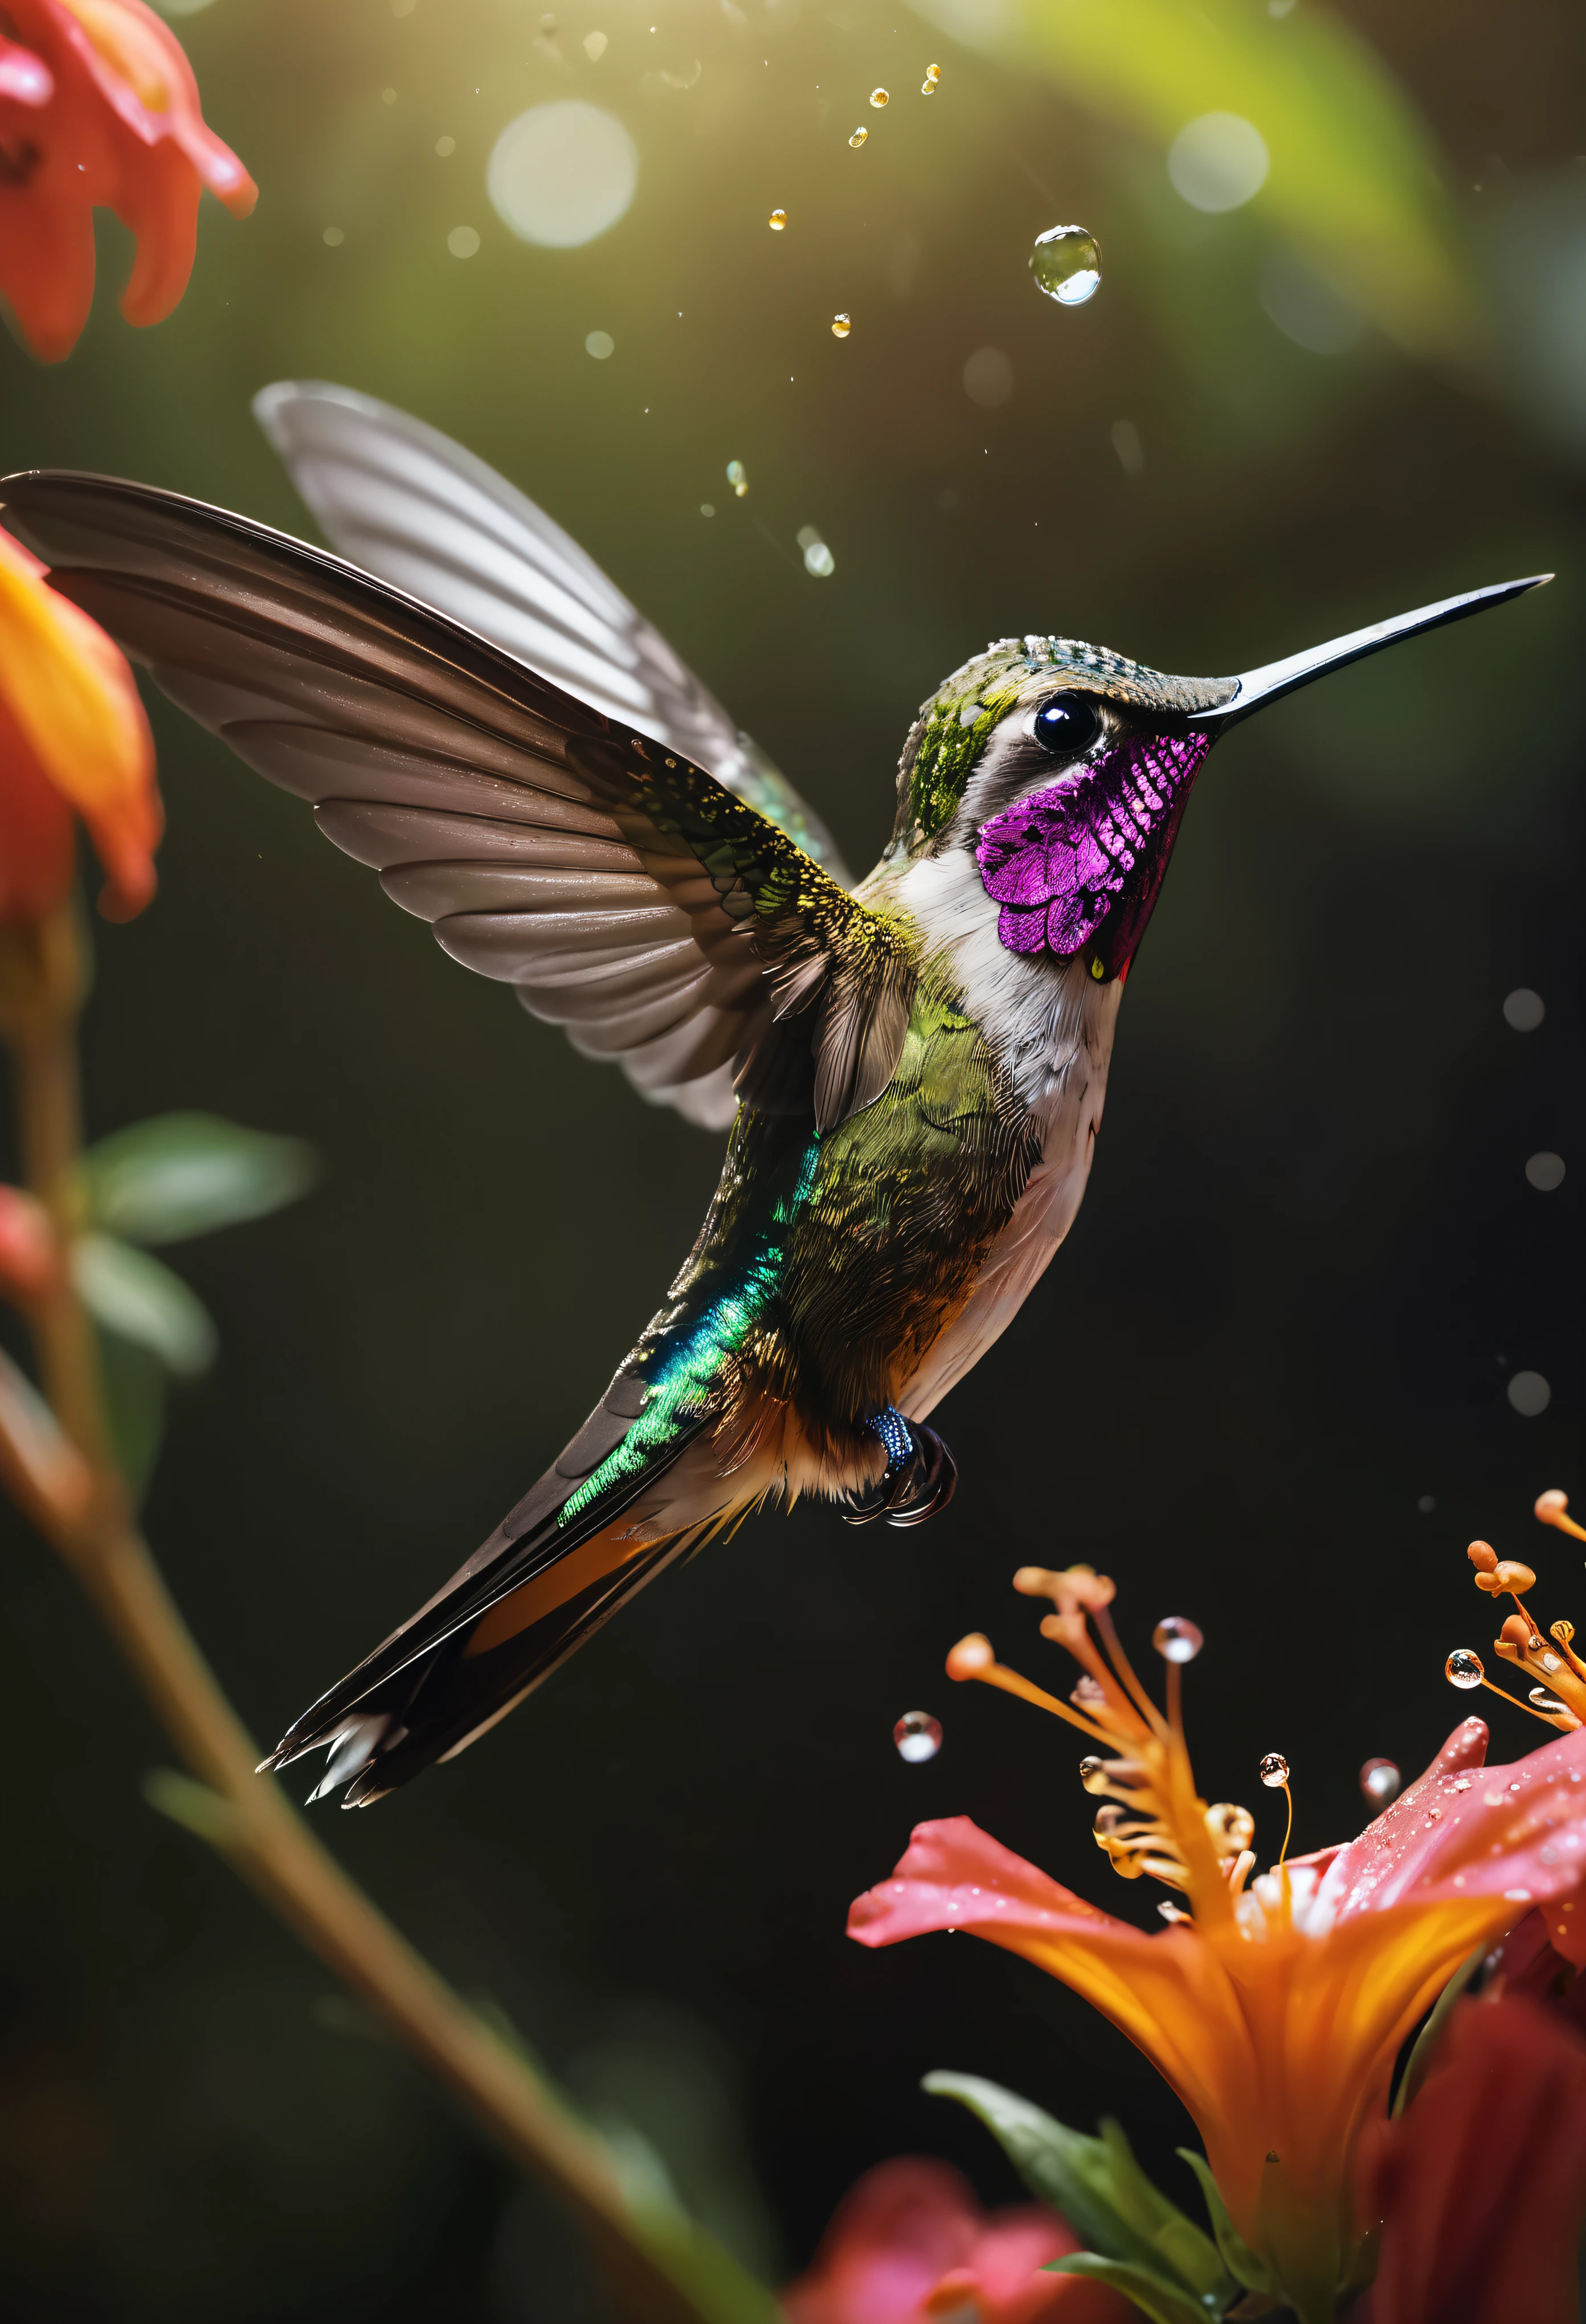 ((Masterpiece in maximum 16K resolution):1.6),((soft_color_photograpy:)1.5), ((Ultra-Detailed):1.4),((Movie-like still images and dynamic angles):1.3), ((motion blur):1.2) | (Macro shot cinematic photo of a Exotic Hummingbird at a flower), (hummingbird wrist flick), (macro lens), (pollen), (dewdrops), (shimmer), (visual experience) ,(Realism), (Realistic),award-winning graphics, dark shot, film grain, extremely detailed, Digital Art, rtx, Unreal Engine, scene concept anti glare effect, All captured with sharp focus.
